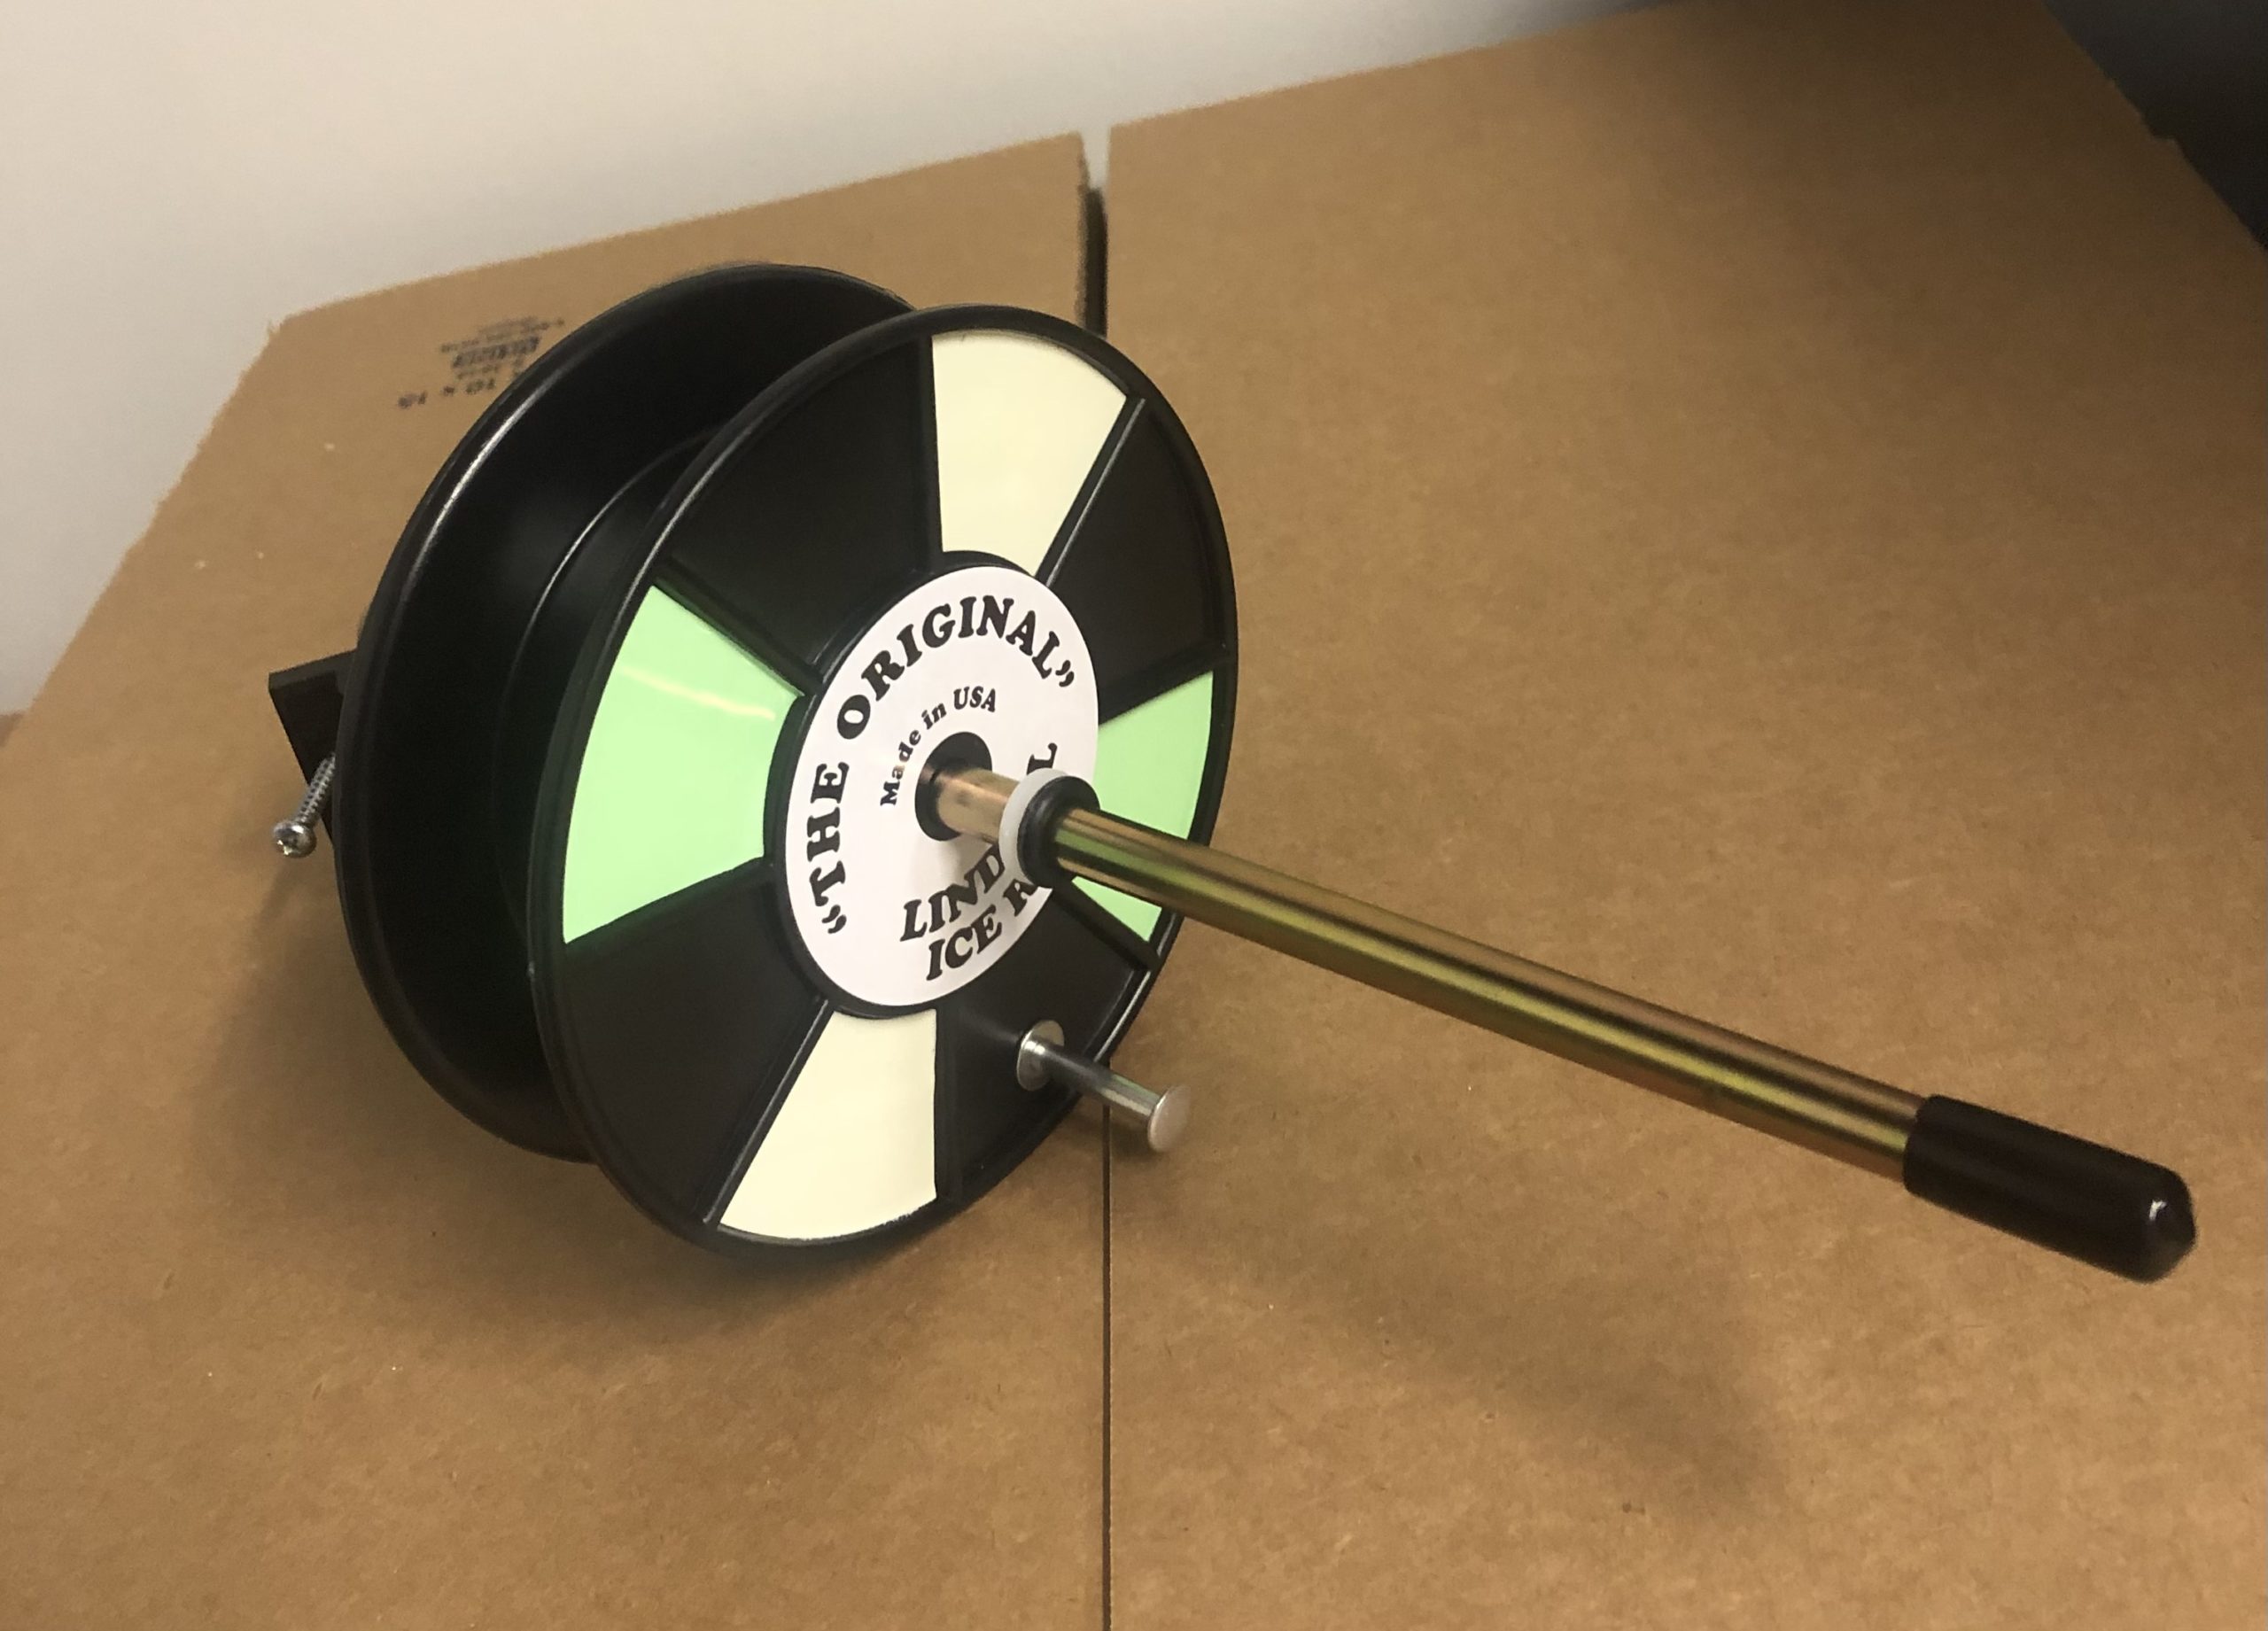 A Lindell Ice Rig Rattle Reel sitting on top of a cardboard box.